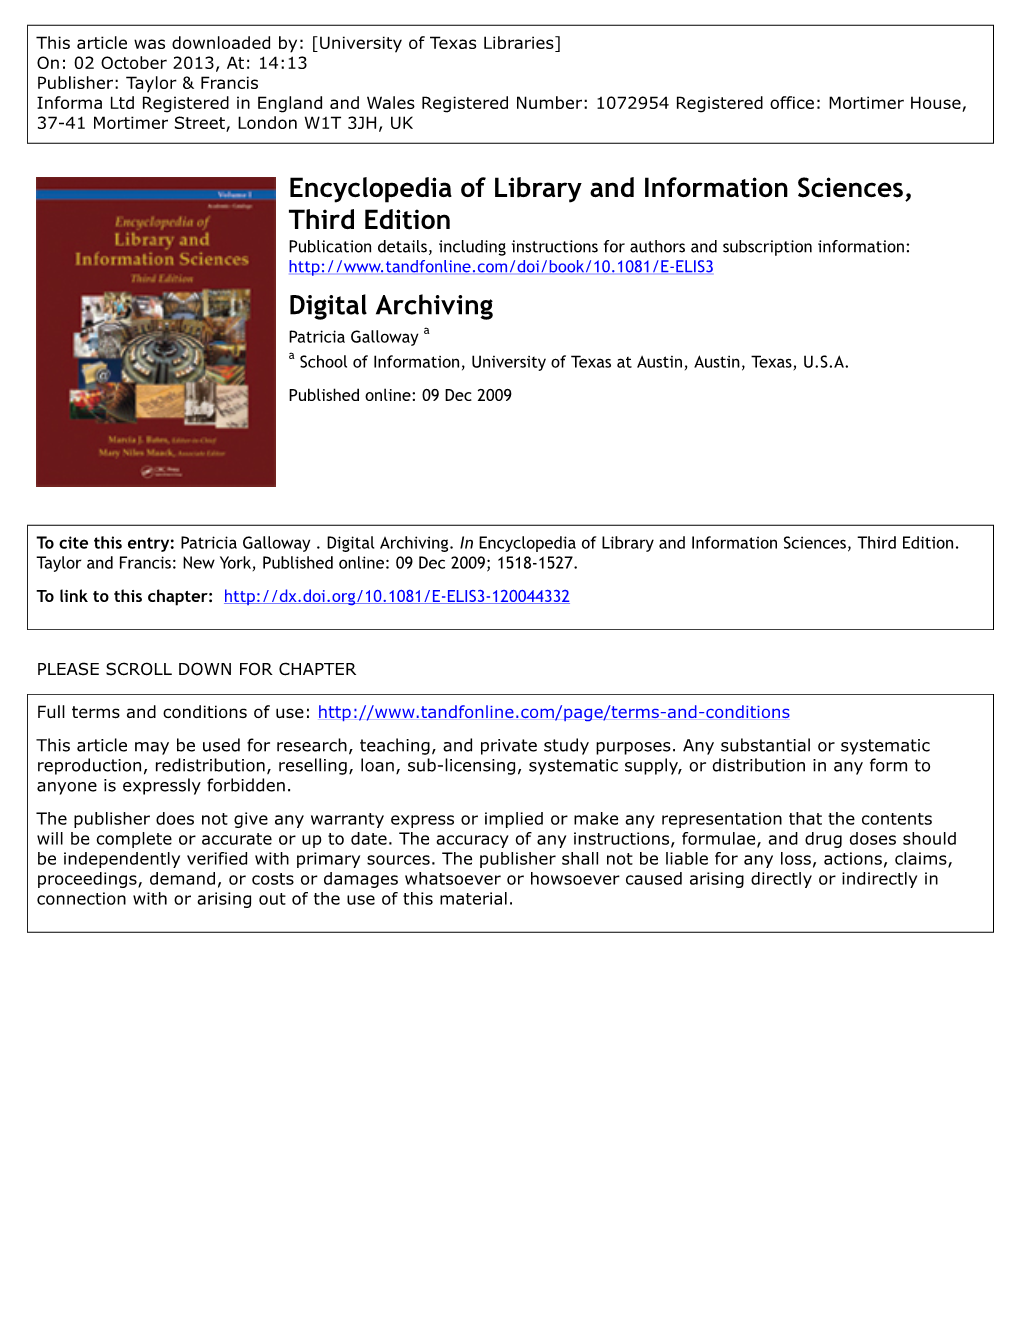 Encyclopedia of Library and Information Sciences, Third Edition